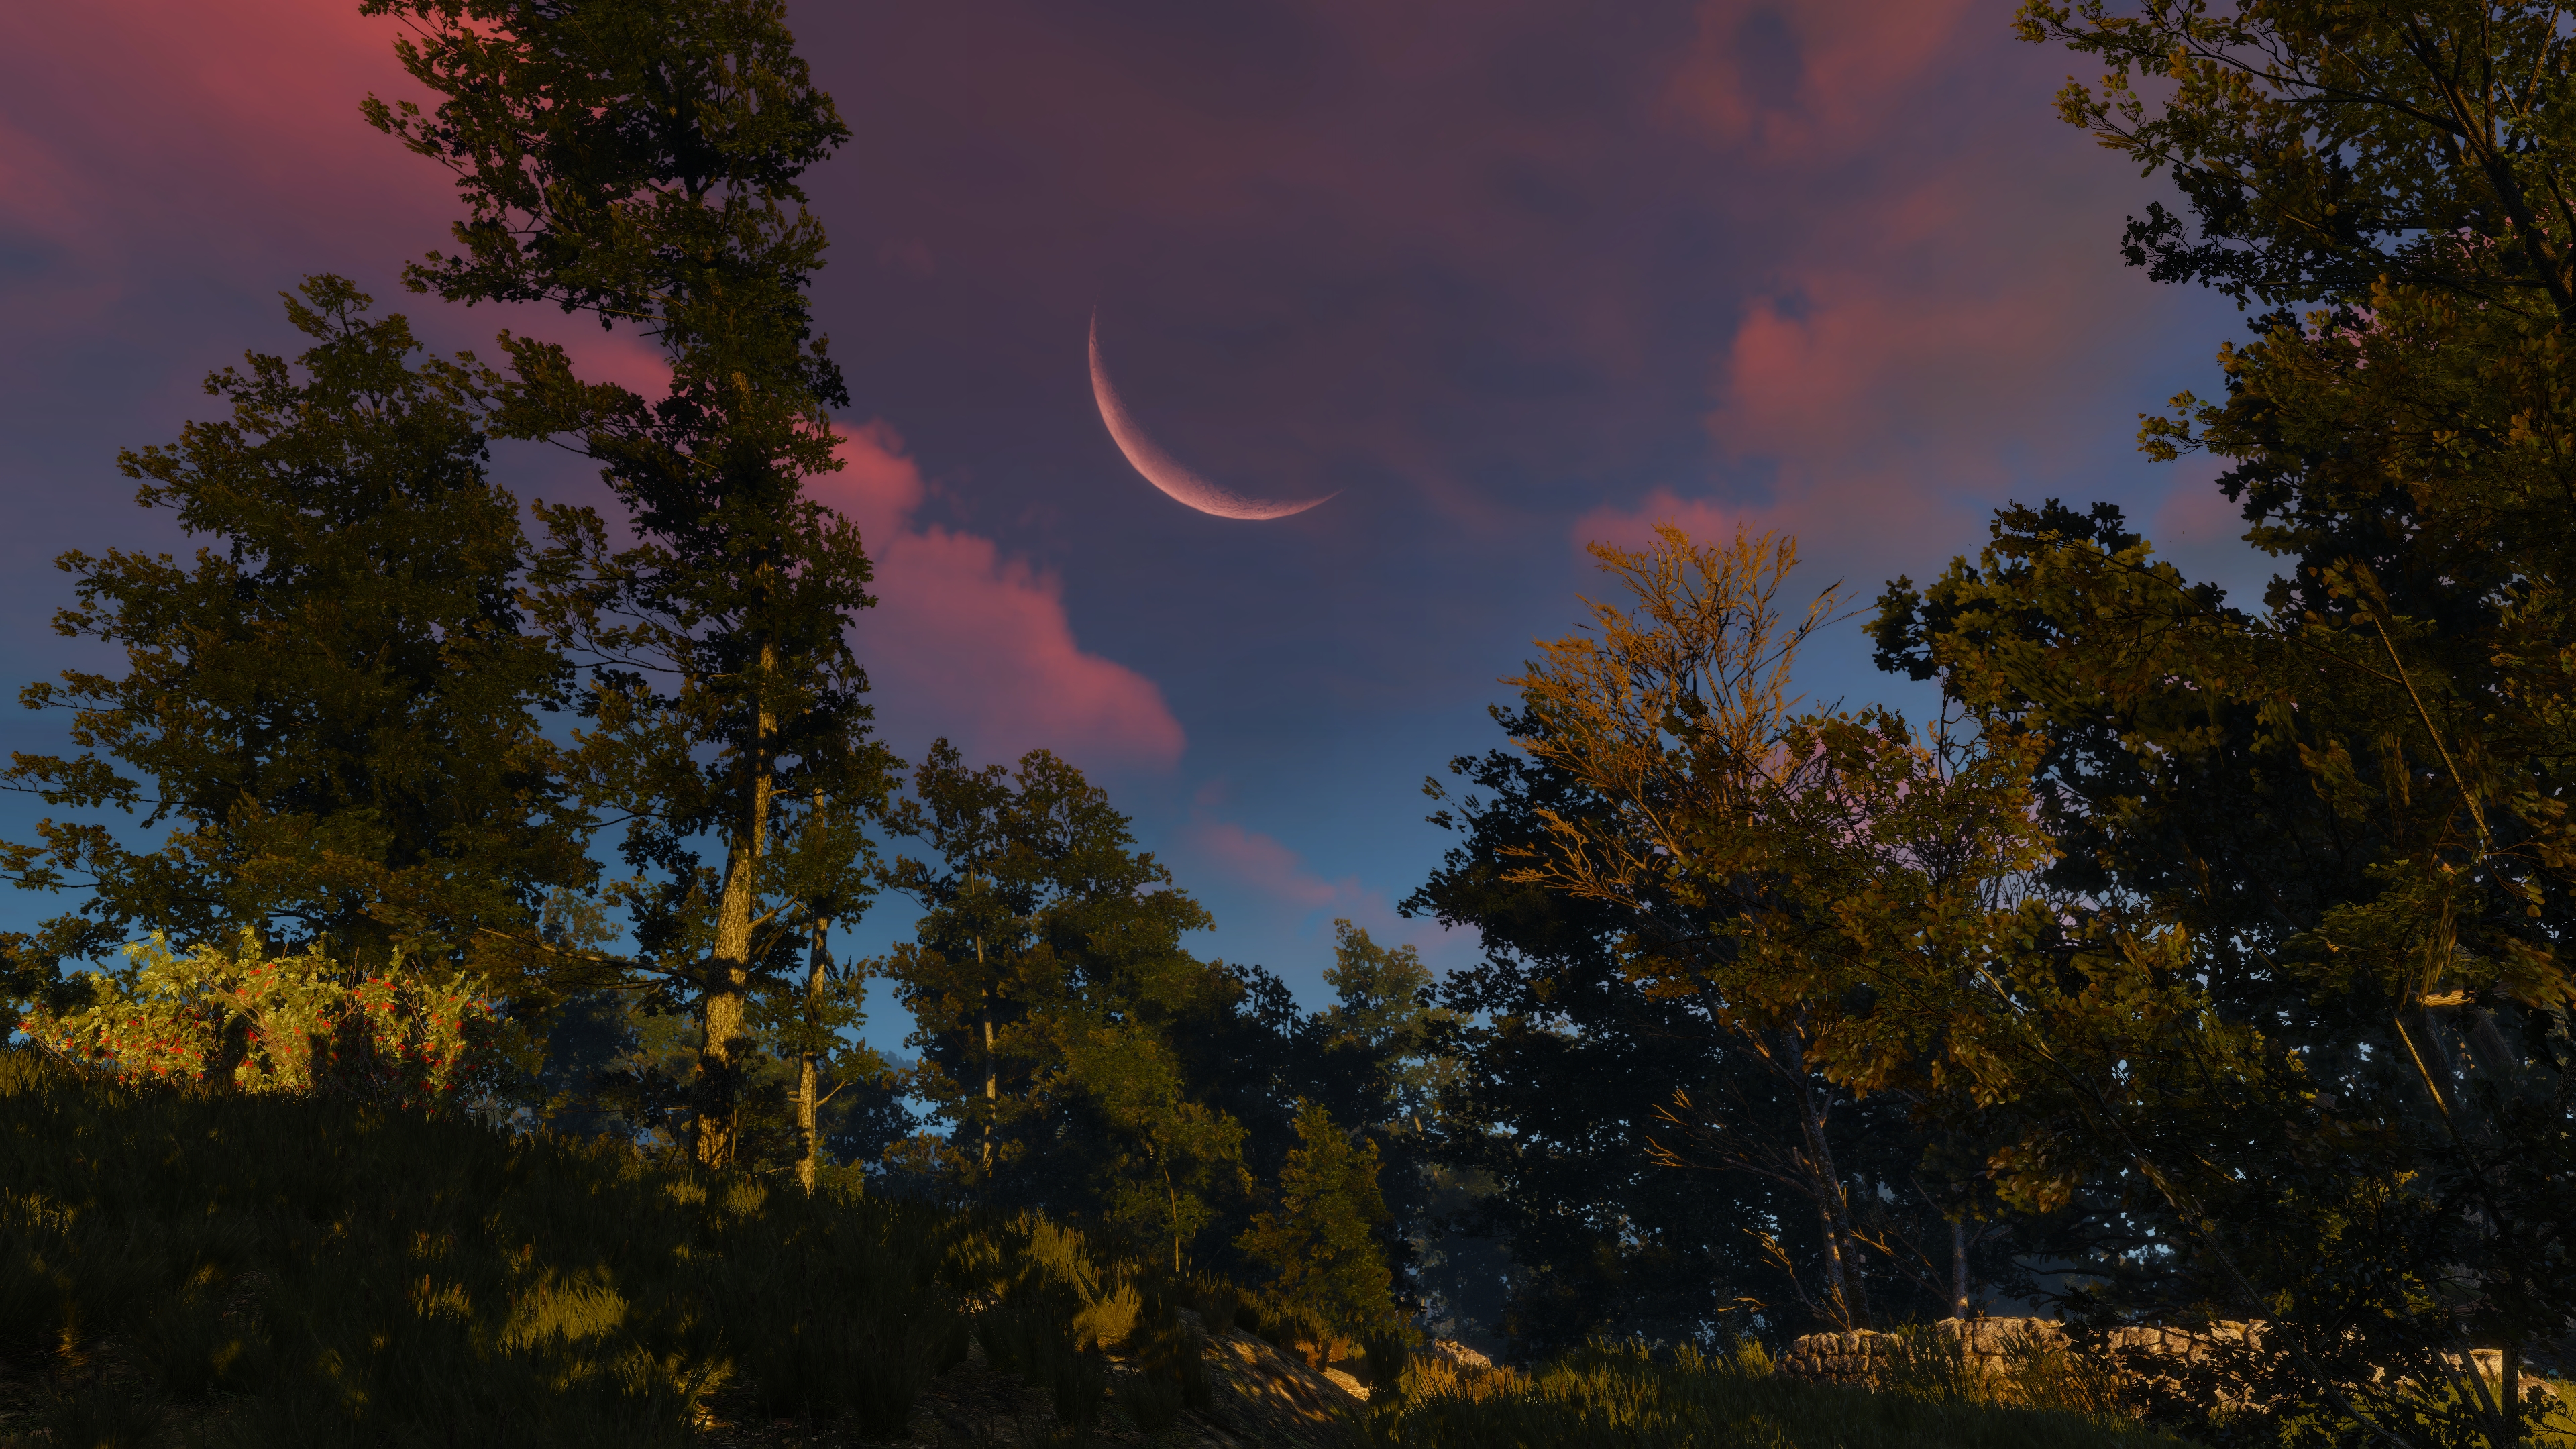 General 3840x2160 The Witcher 3: Wild Hunt screen shot PC gaming Moon sunset sky video game art clouds video games trees nature outdoors